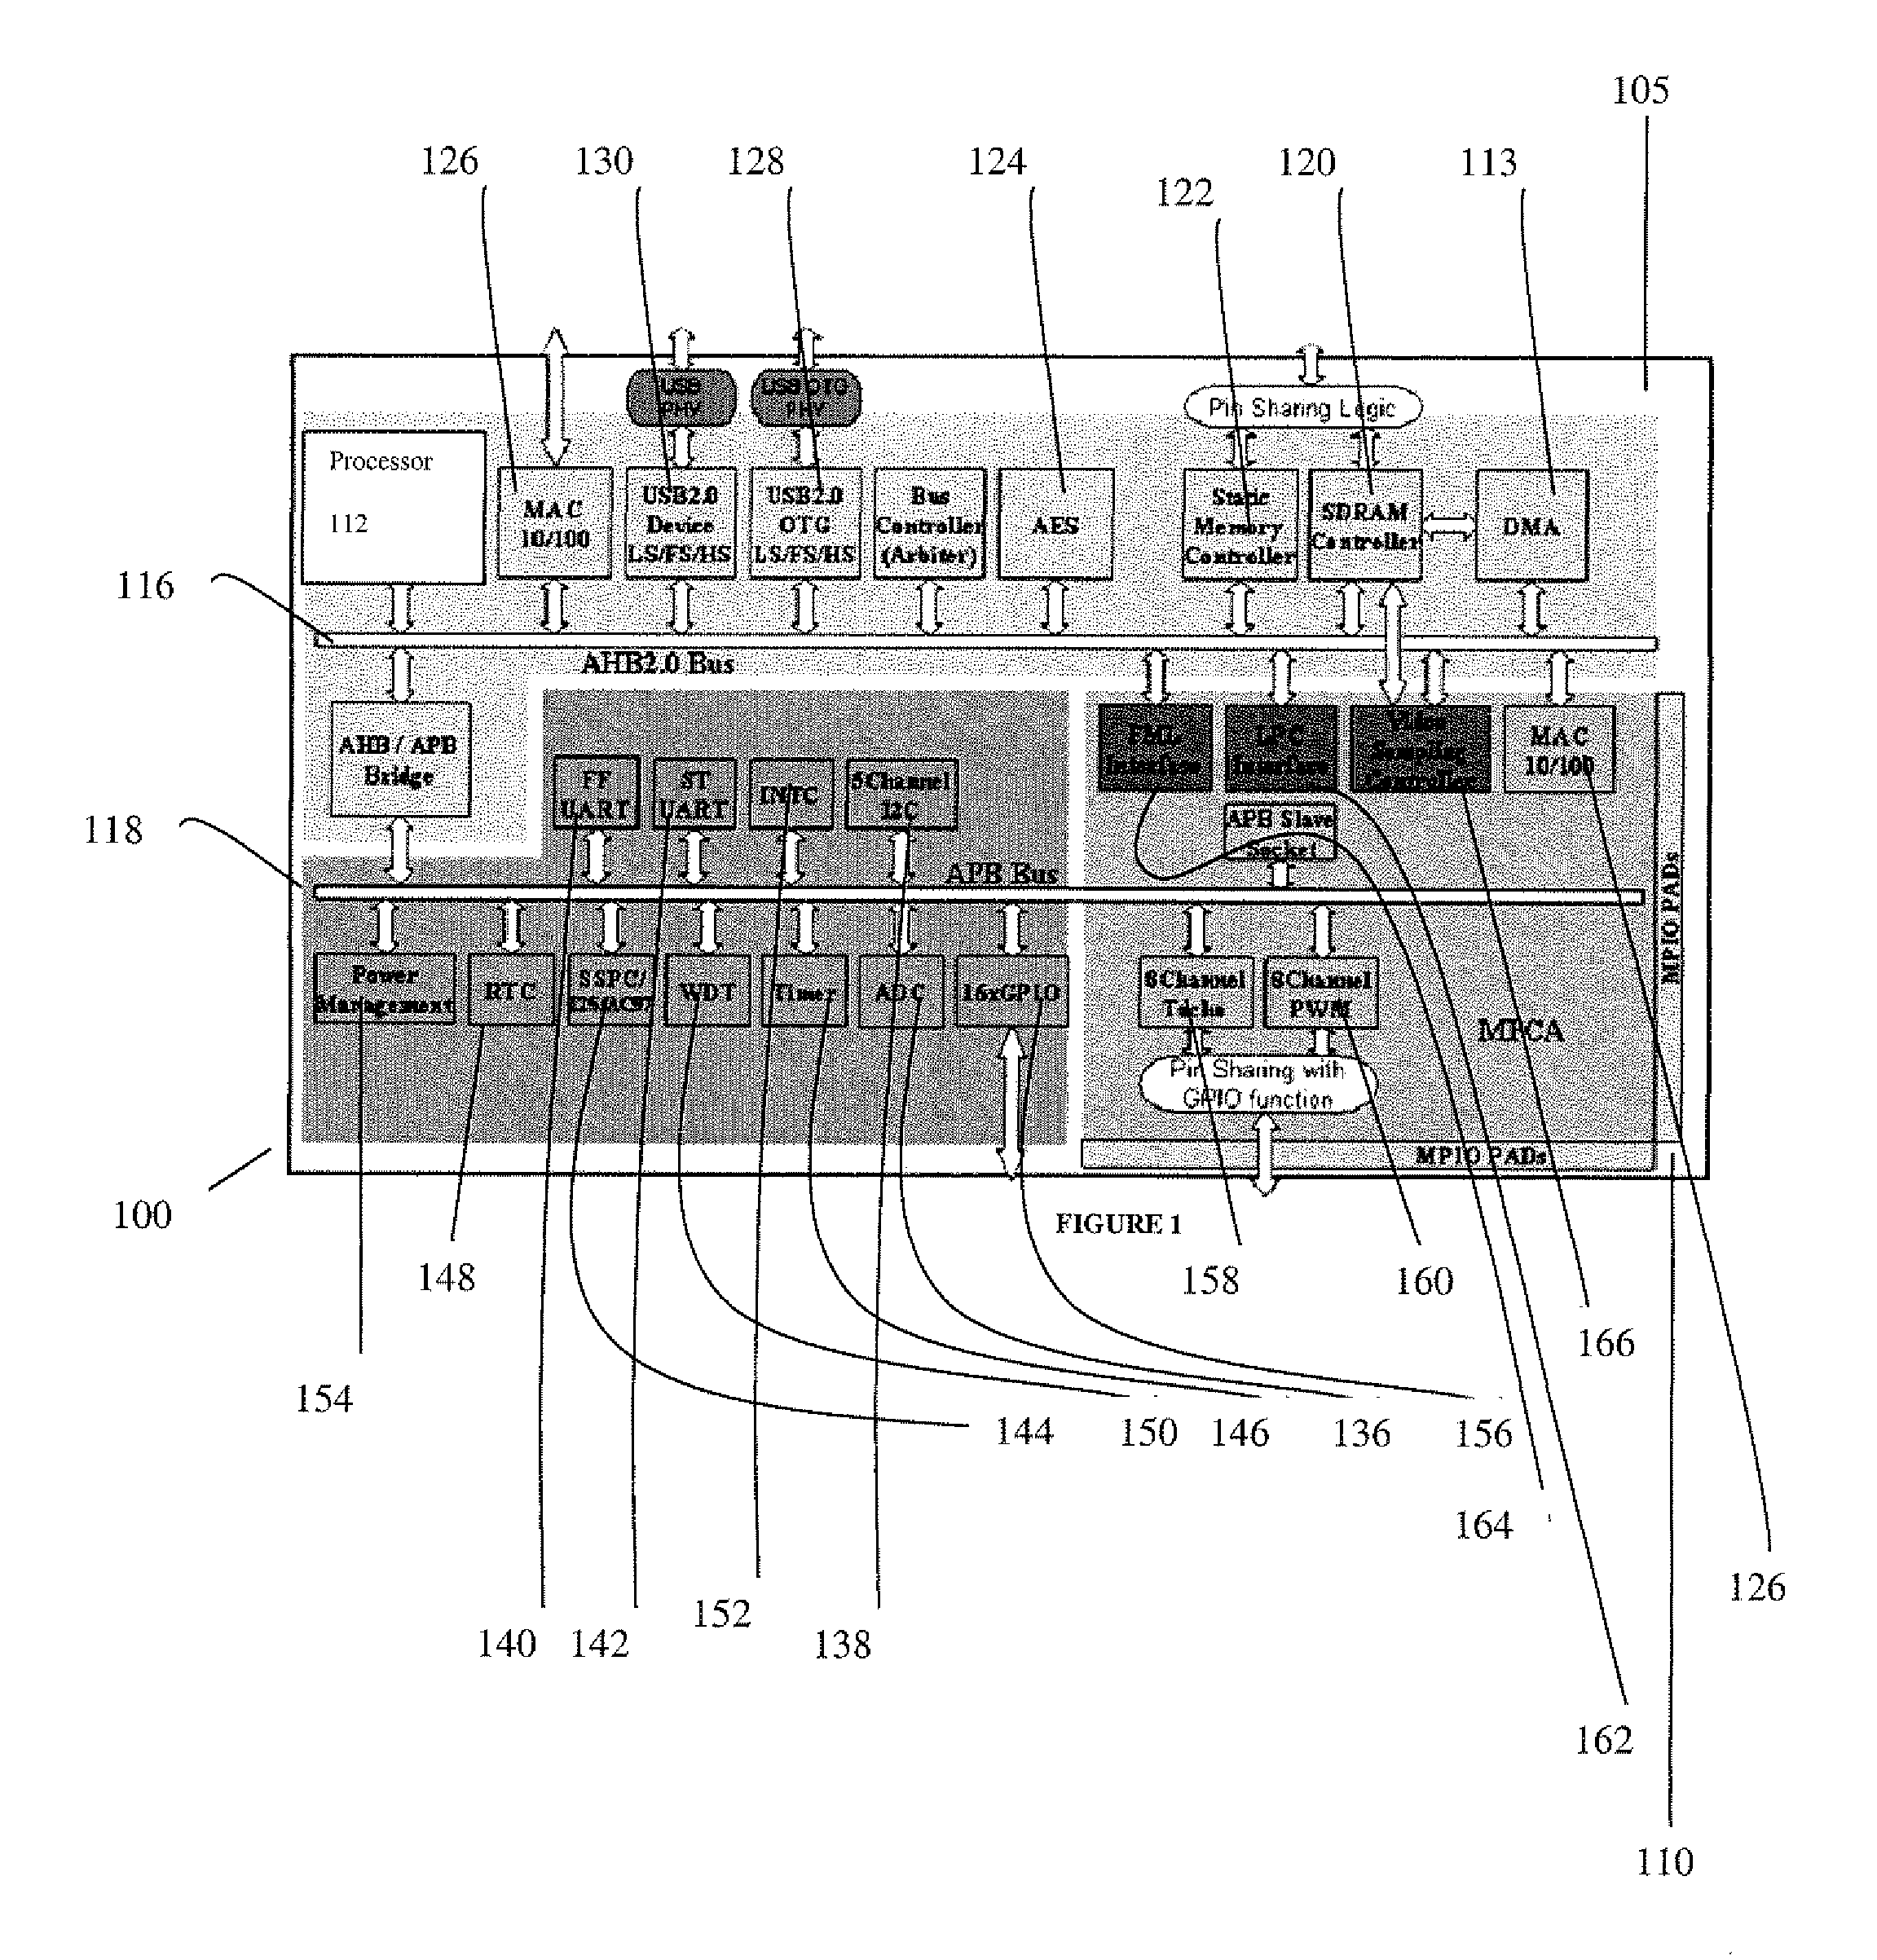 Architecture And Method For Remote Platform Control Management